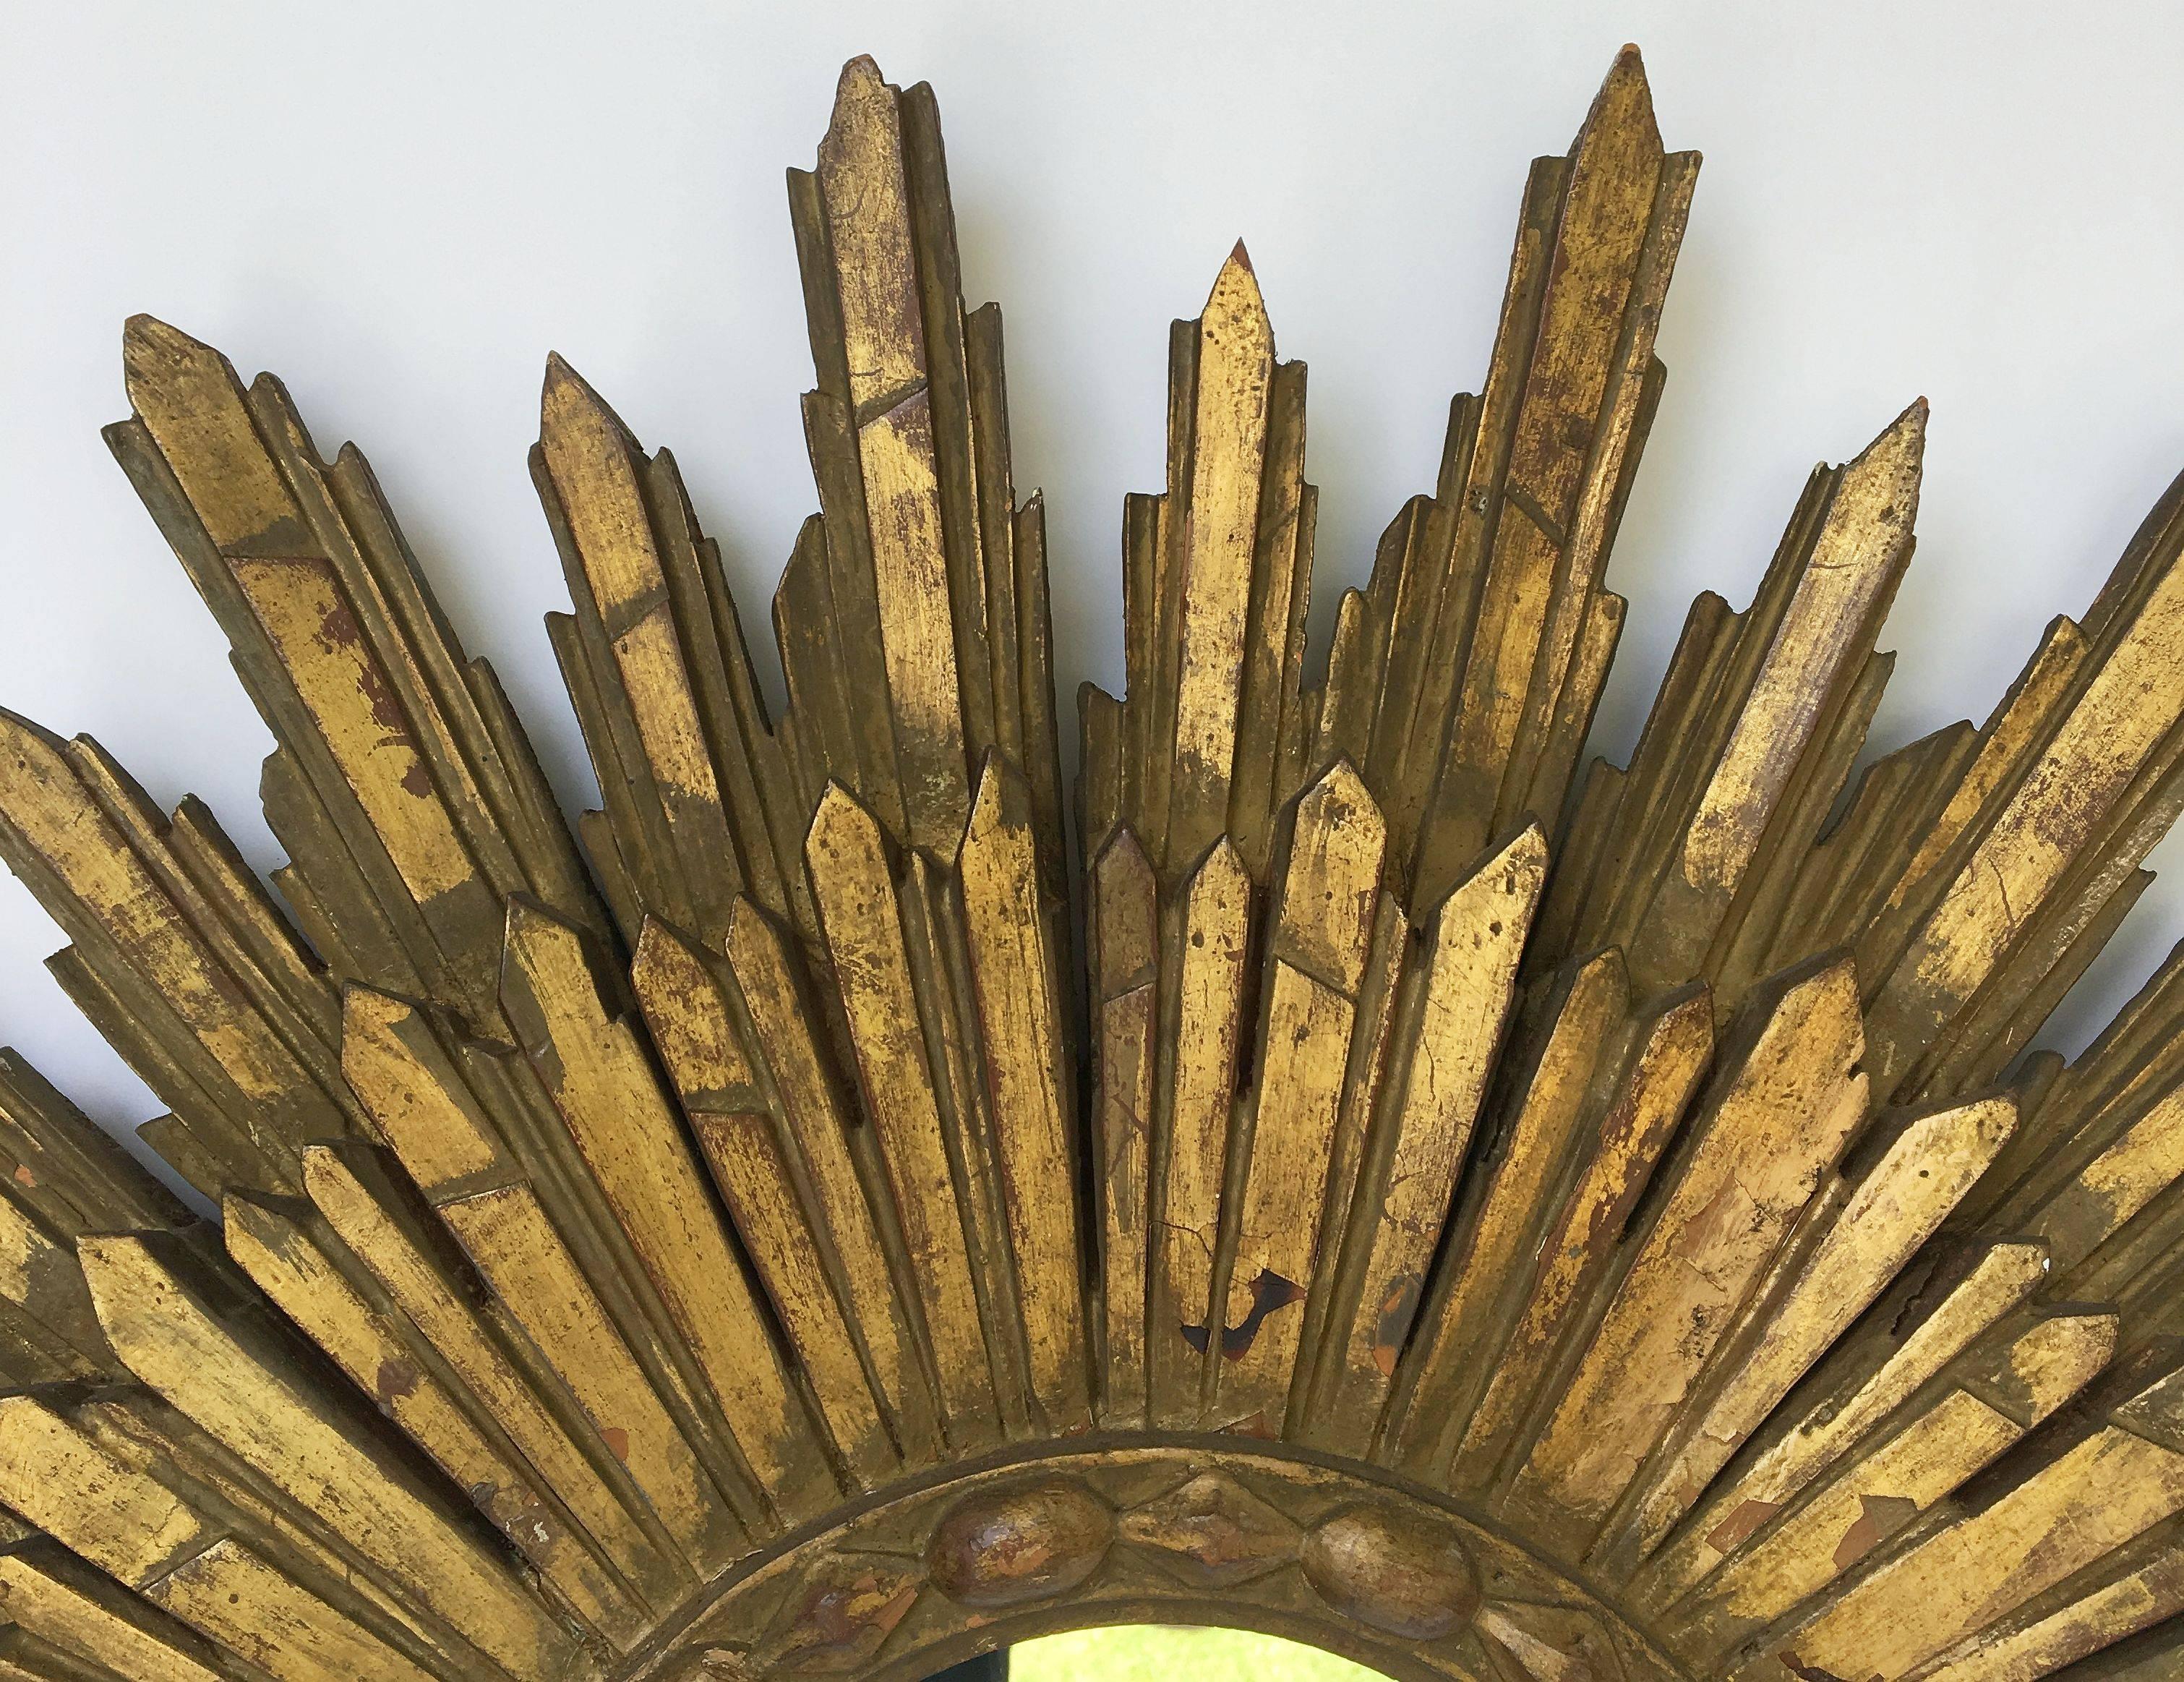 A lovely French gilt sunburst (or starburst) mirror, 29 inches diameter, with mirrored glass center in moulded frame.